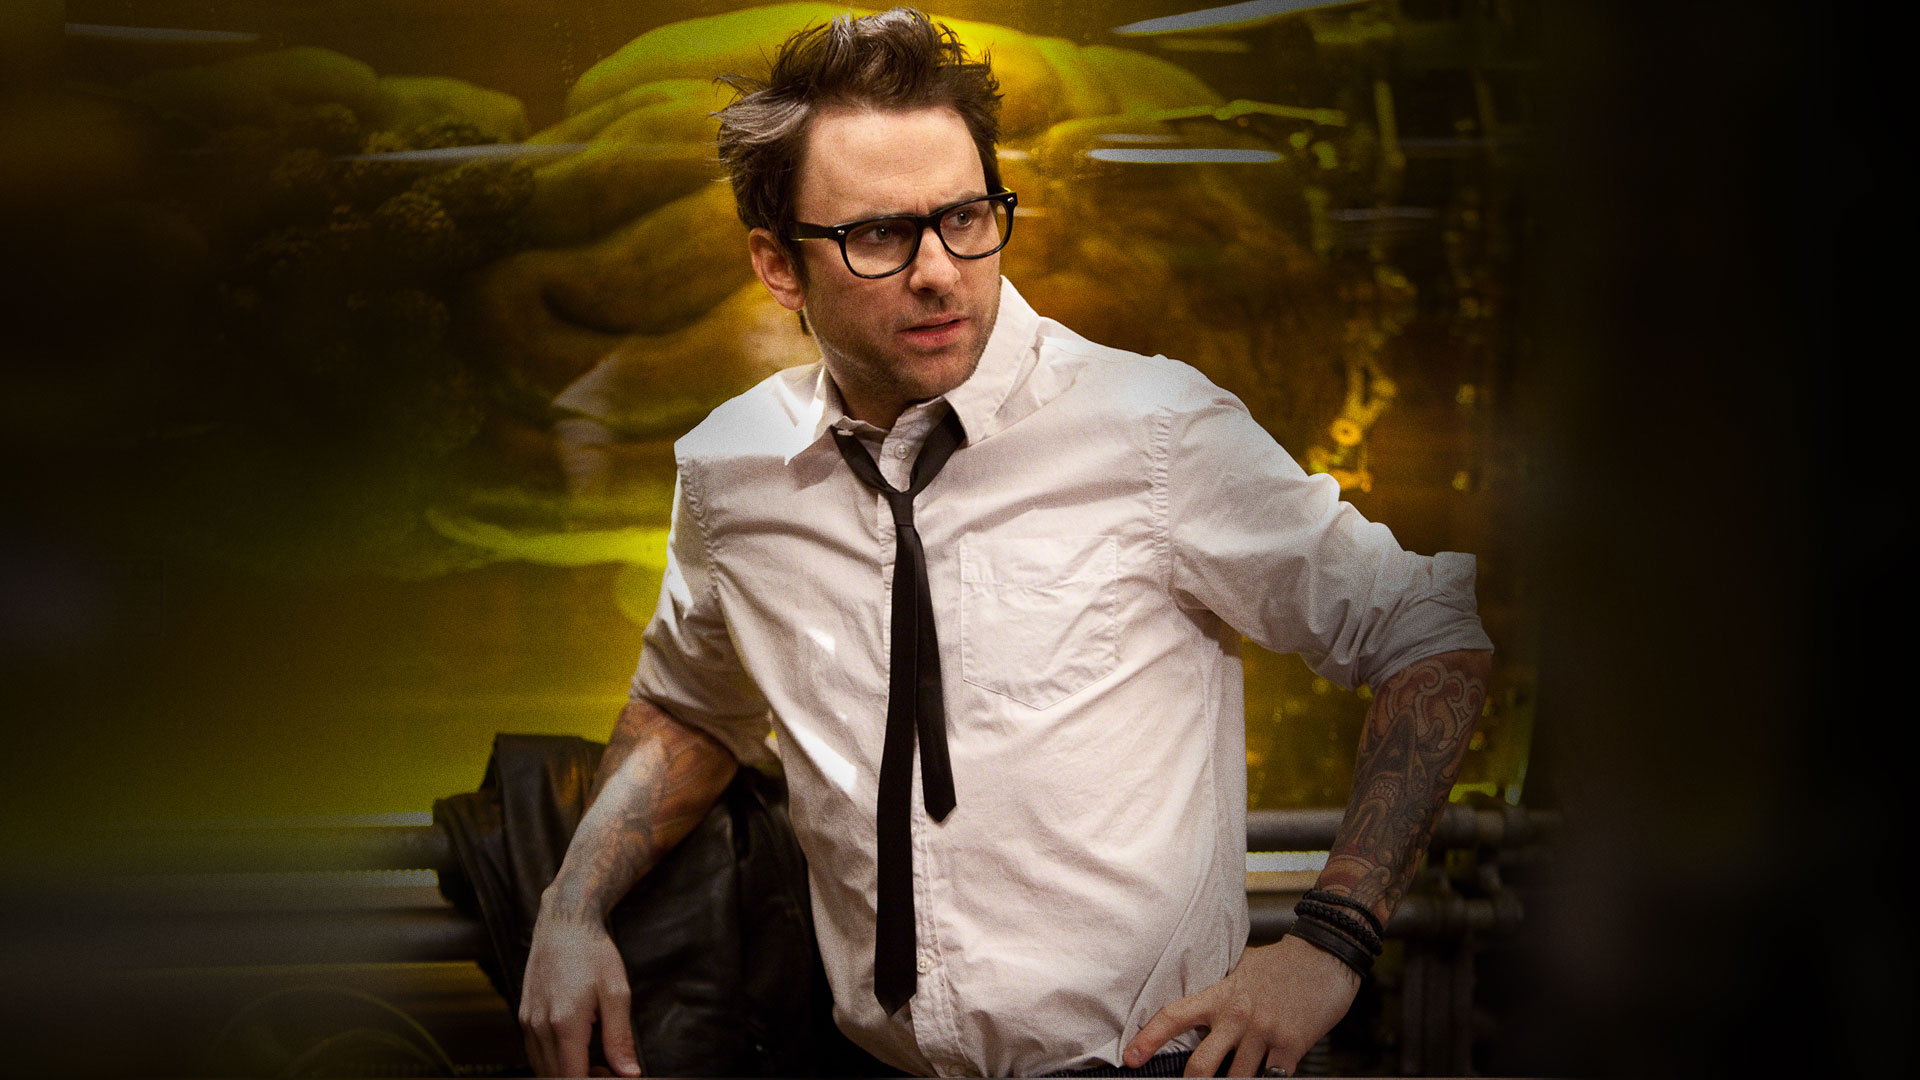 Charlie Day is Dr. Newton Geizler